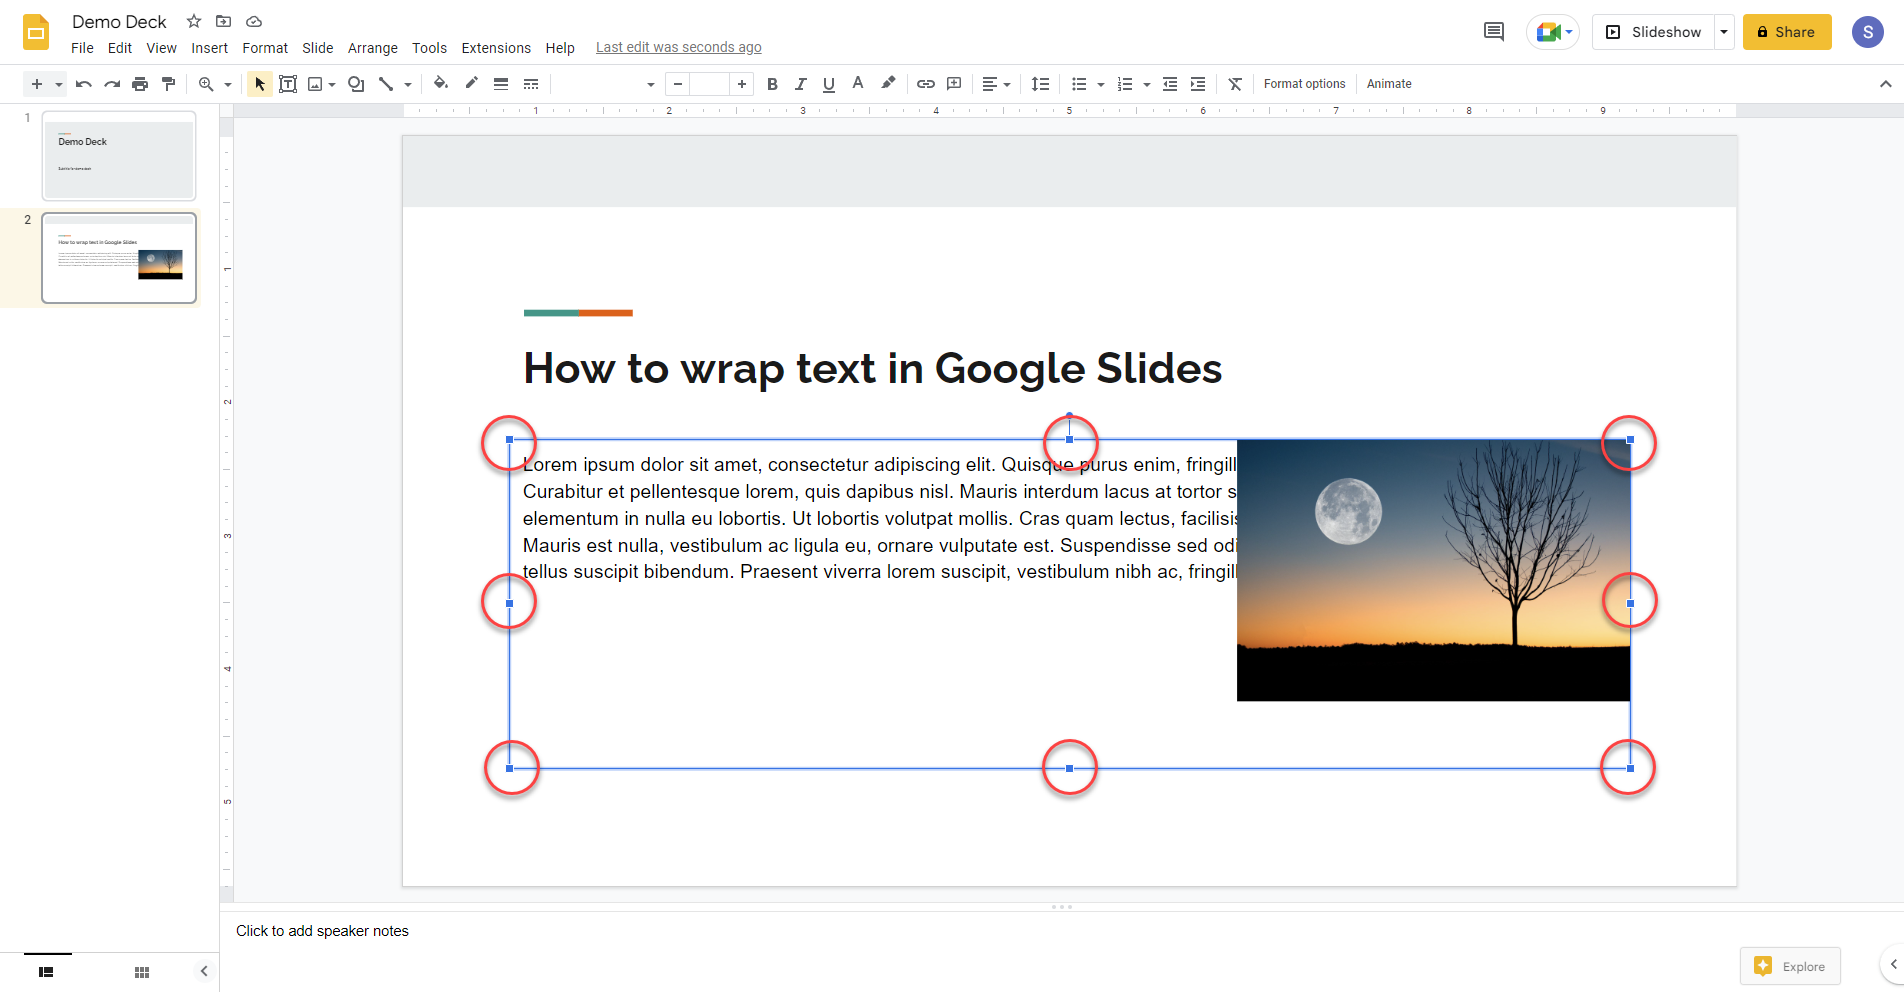 How To Wrap Text In Google Slides